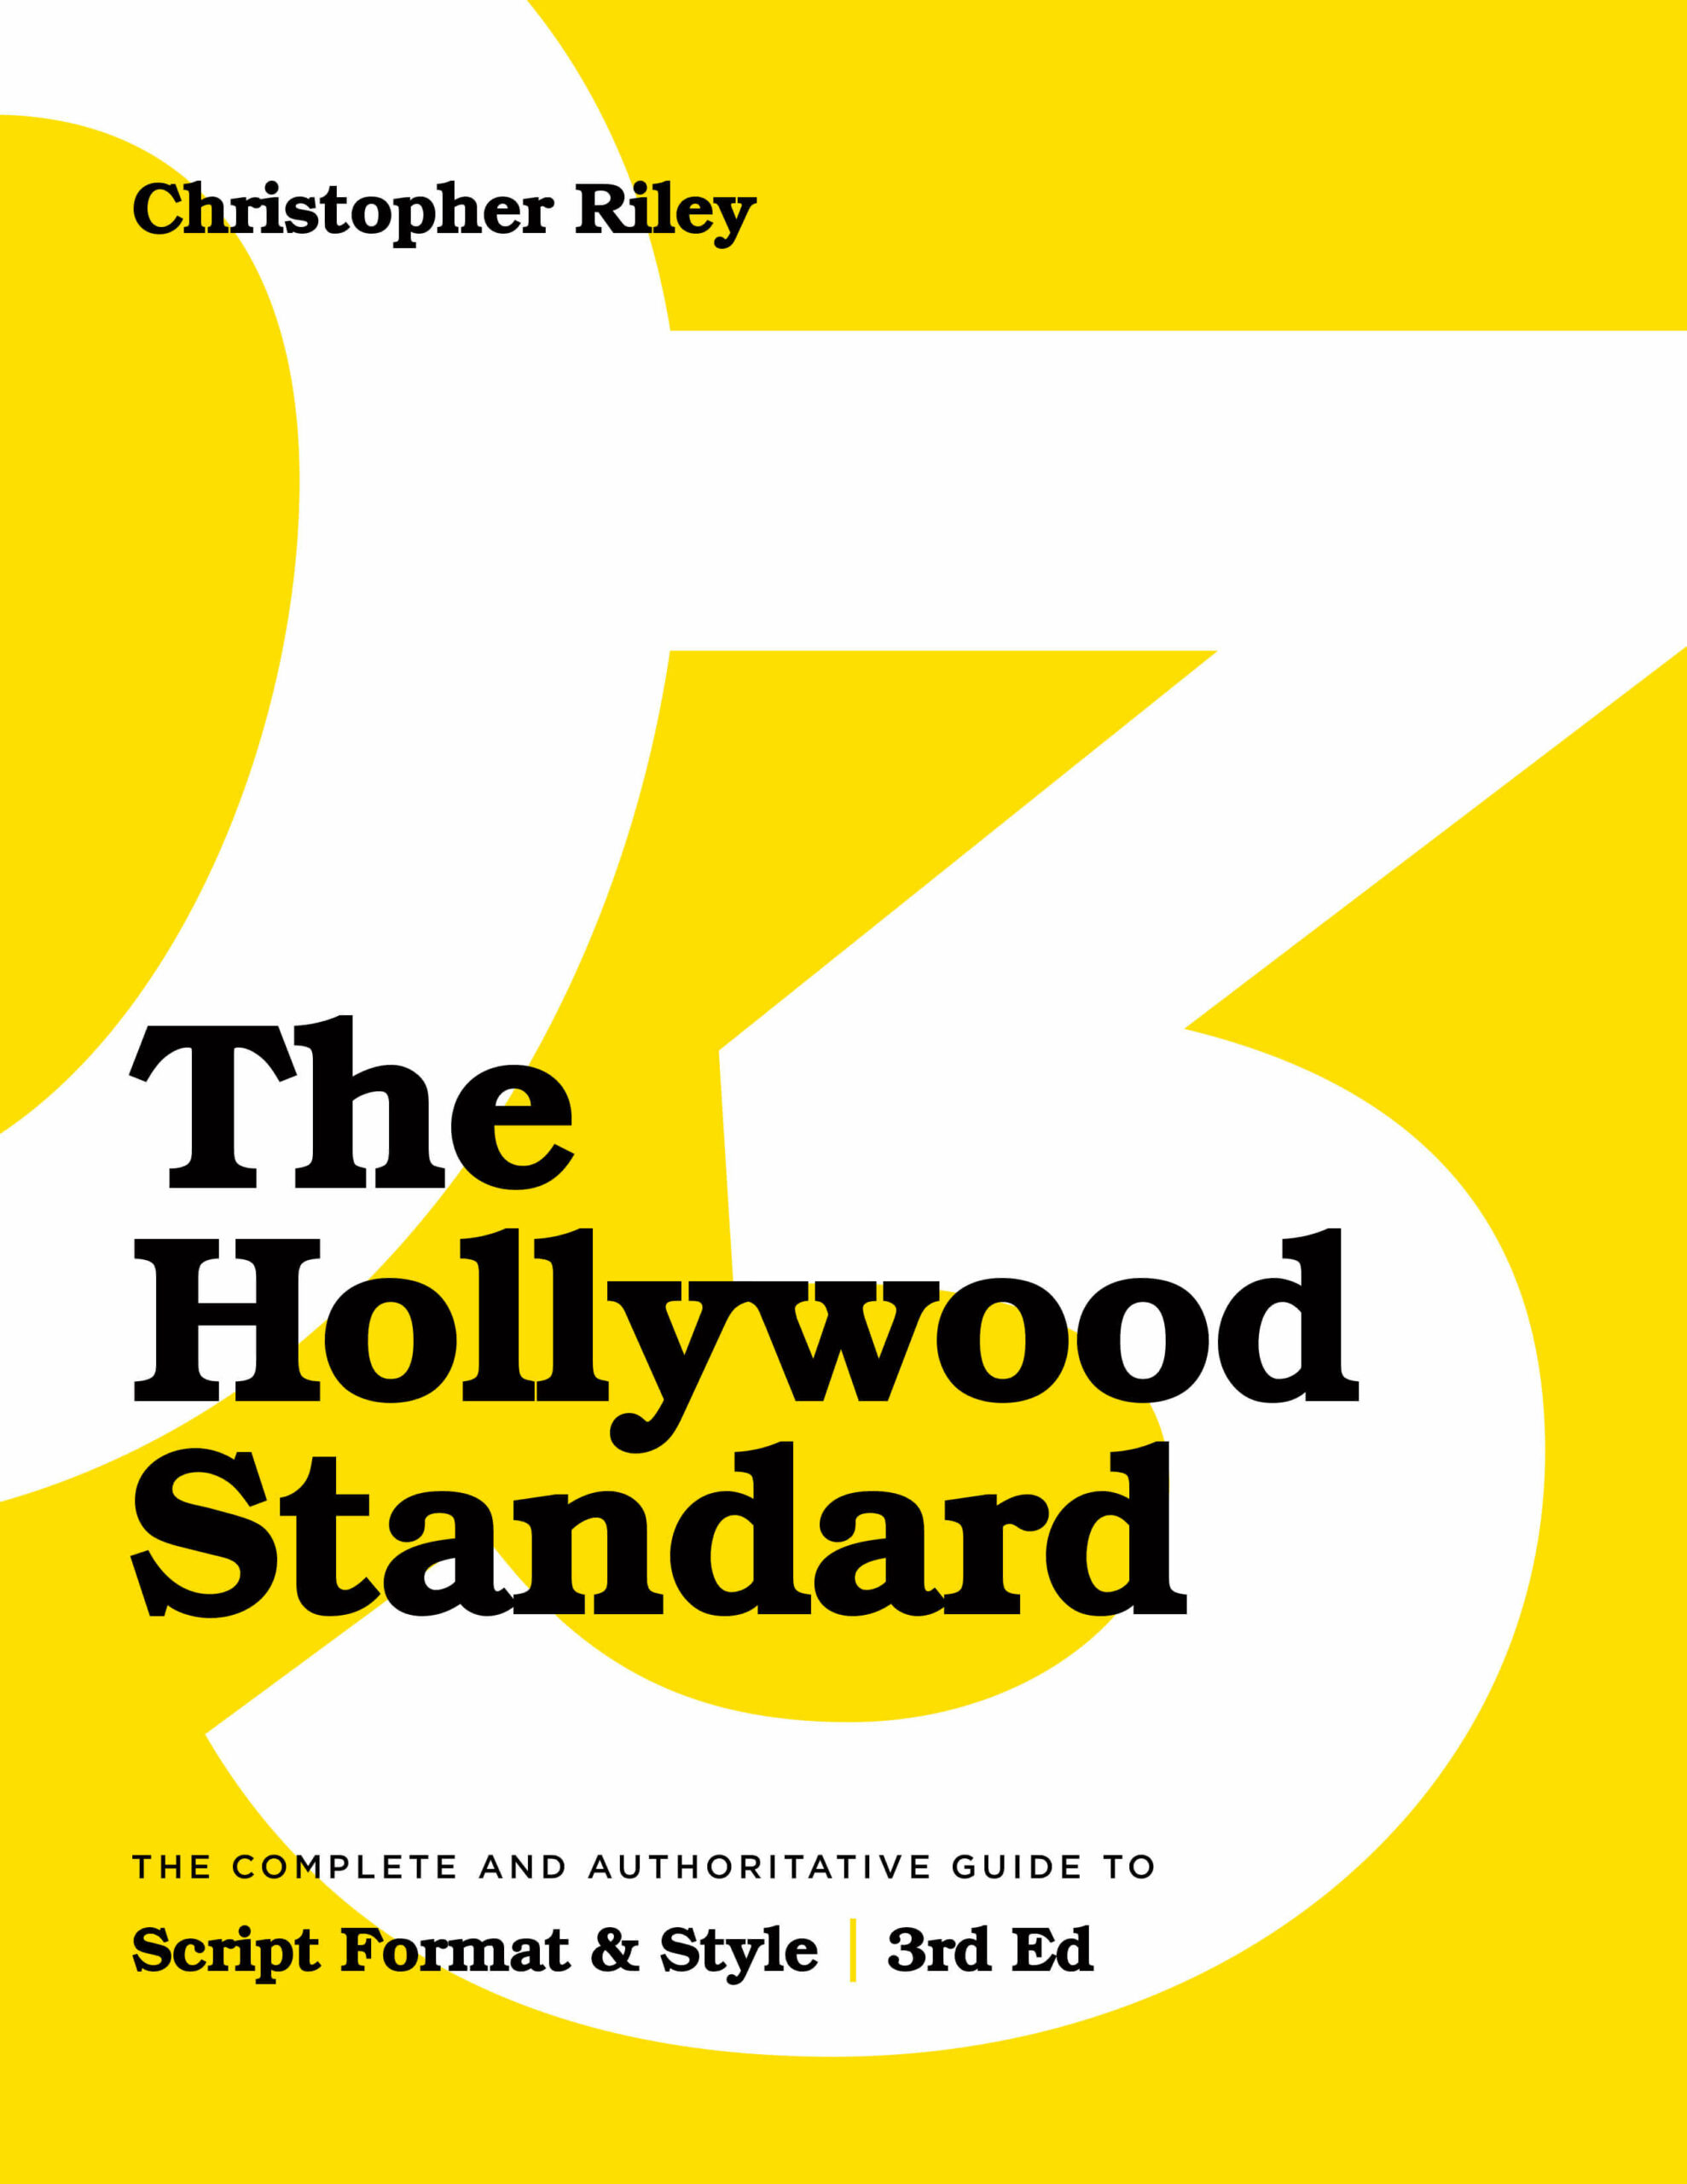 The Hollywood Standard 3rd Ed